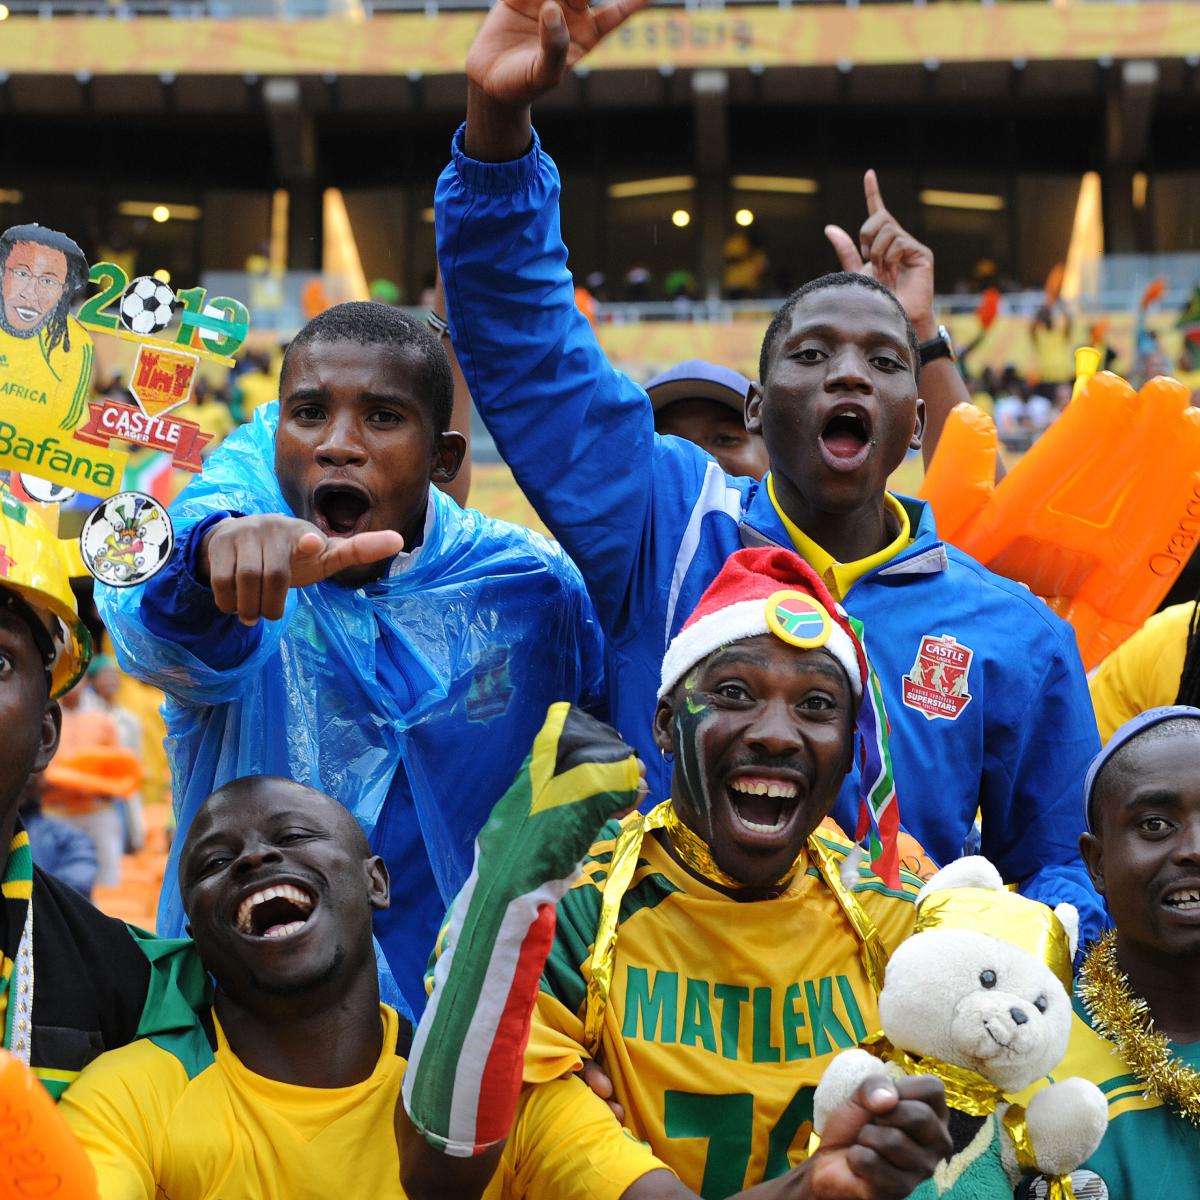 Africa Cup of Nations 2013 TV Schedule: Day 5 Live Stream Info and